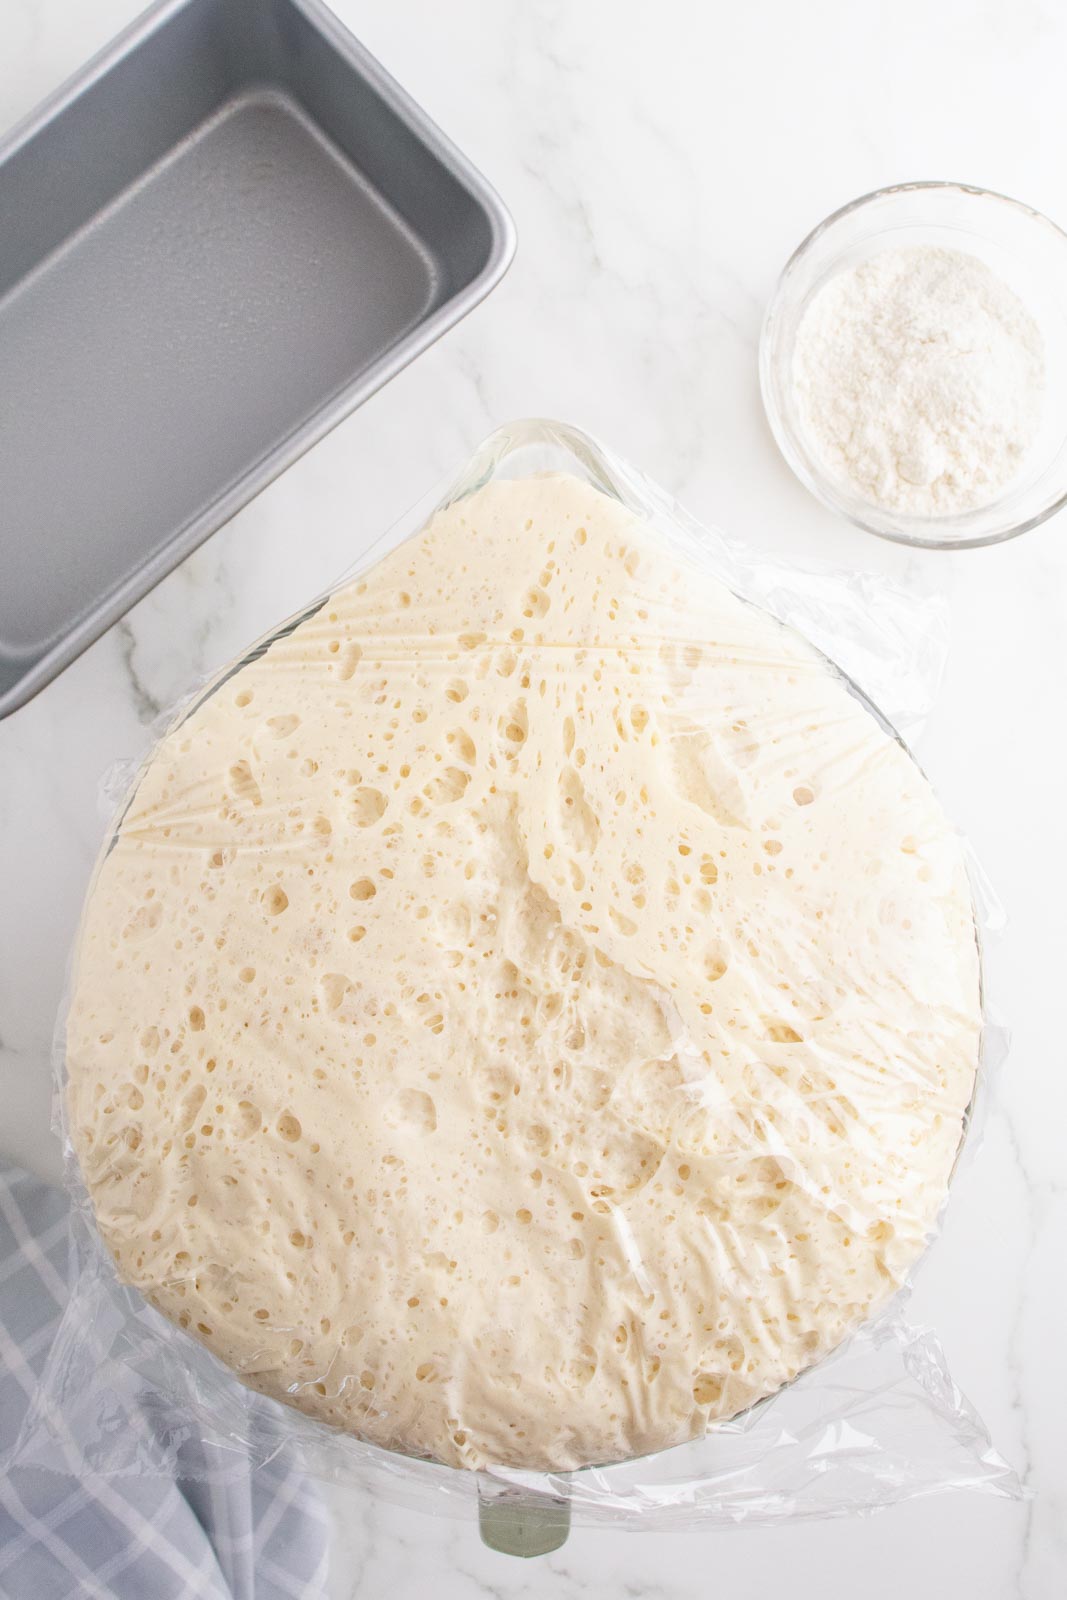 Mashed potato bread dough doubled in size and covered in plastic in a mixing bowl.